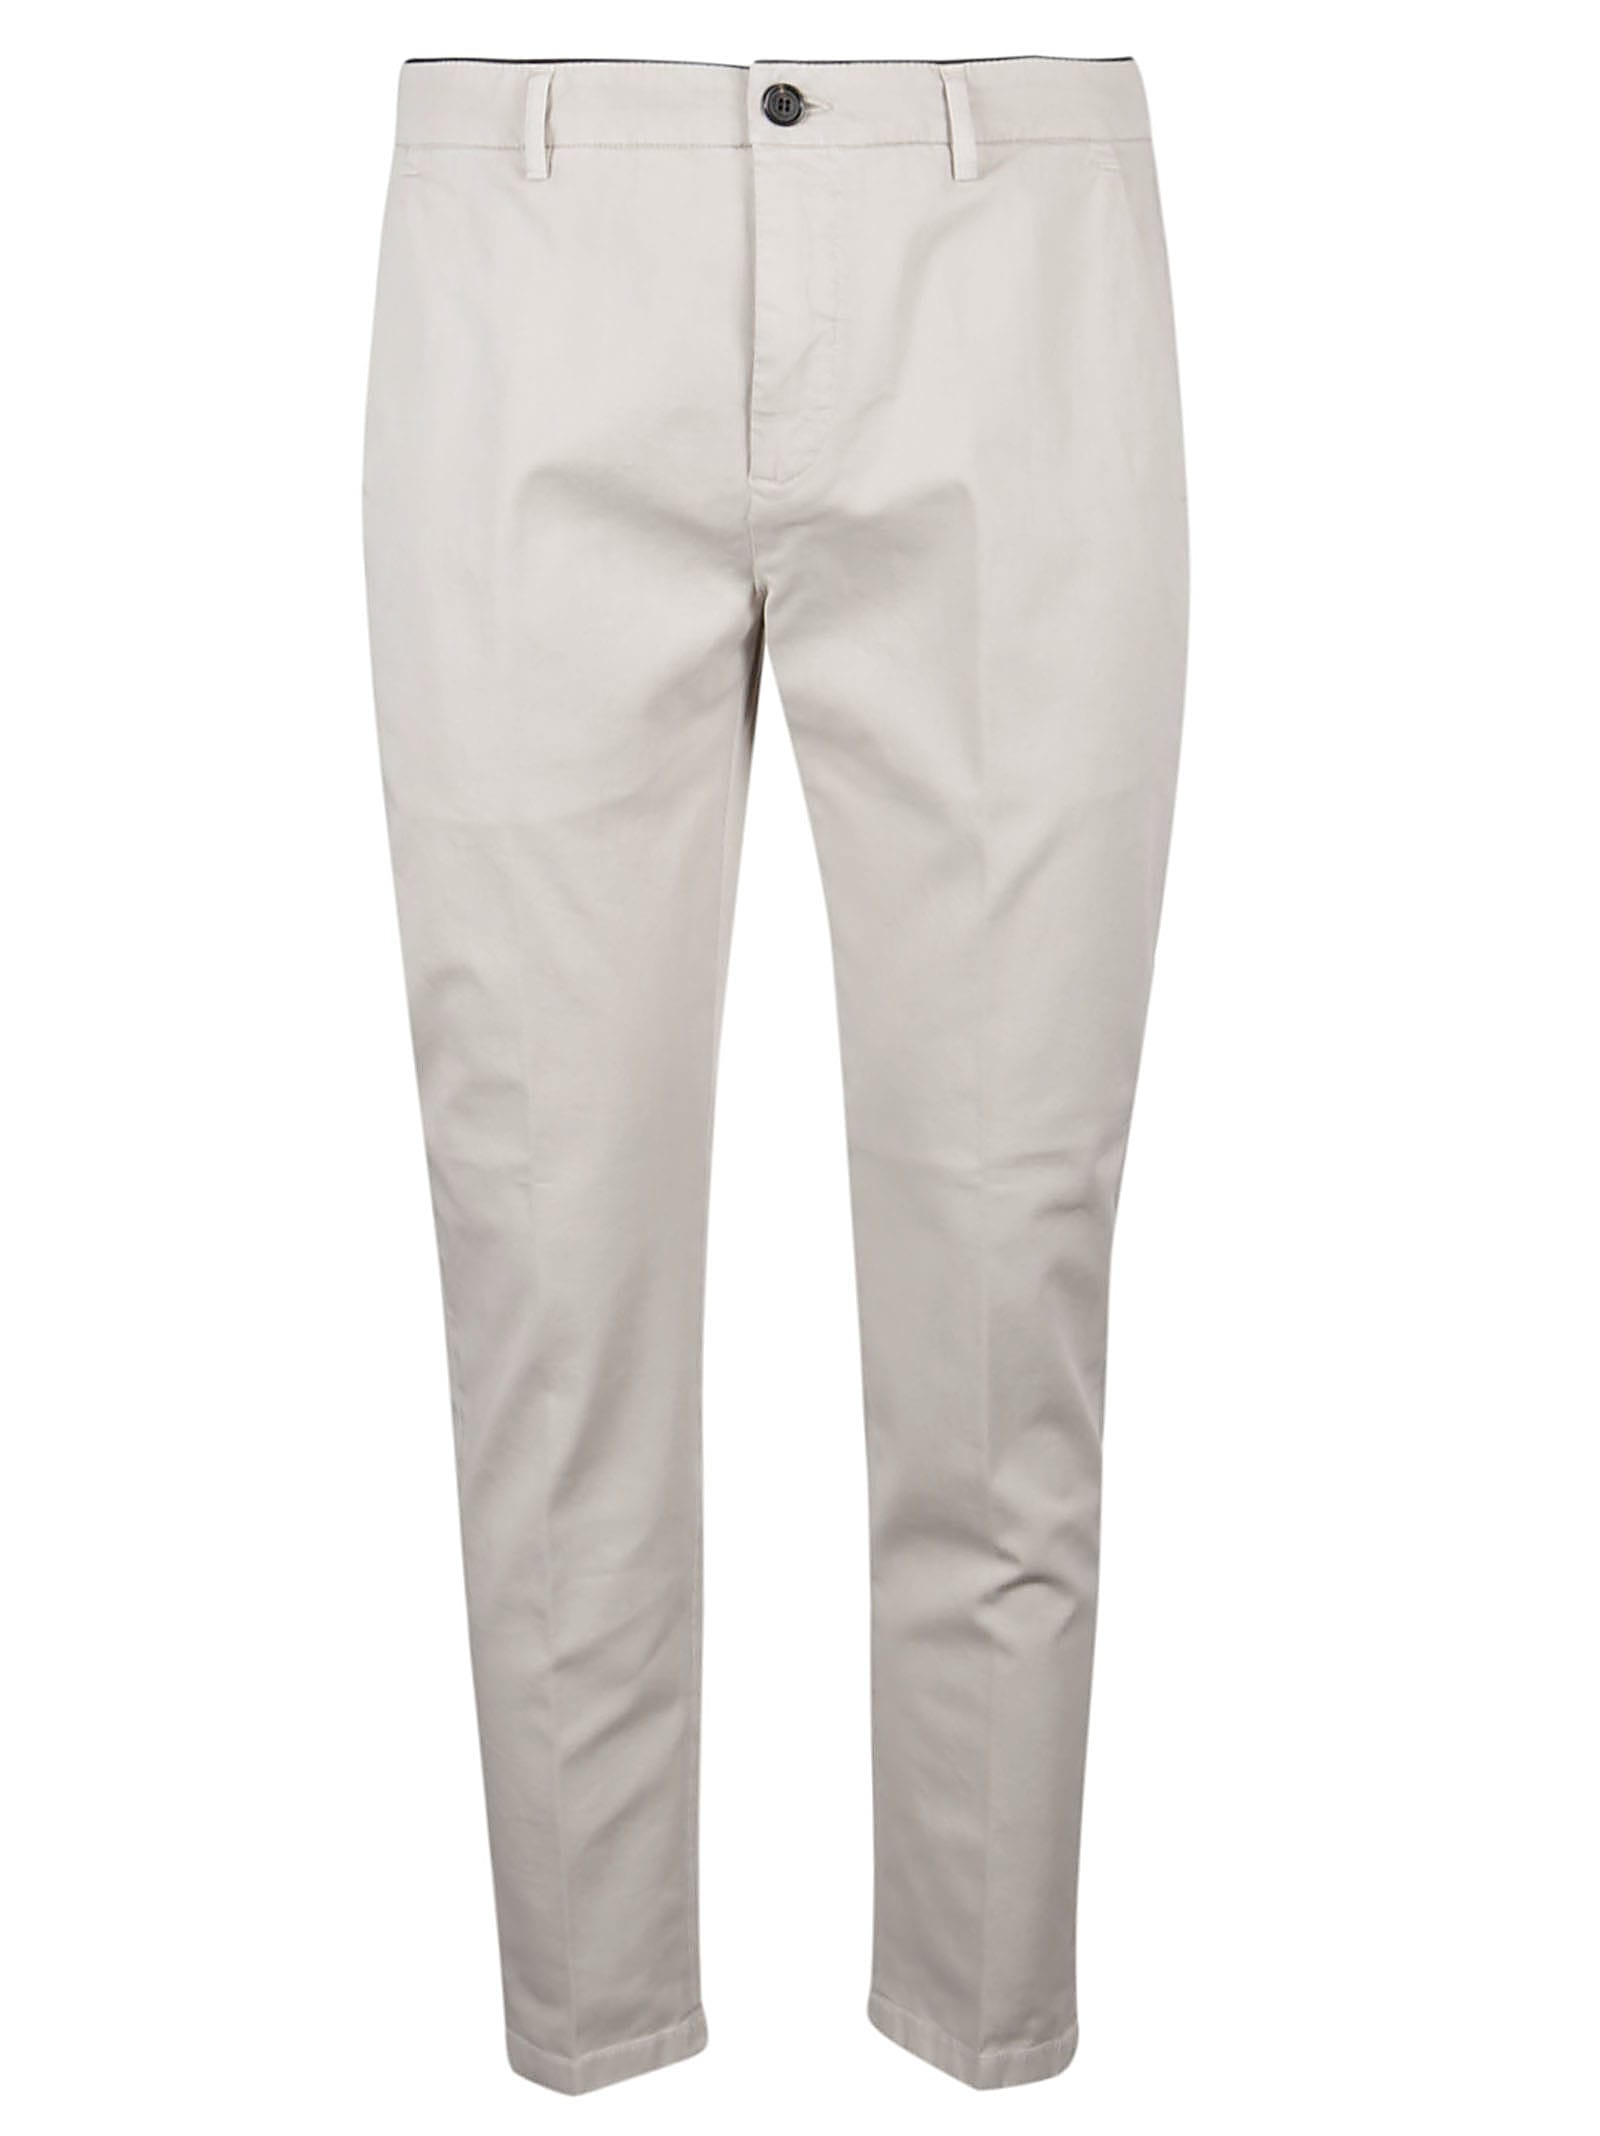 Department 5 Prince Pant Chinos